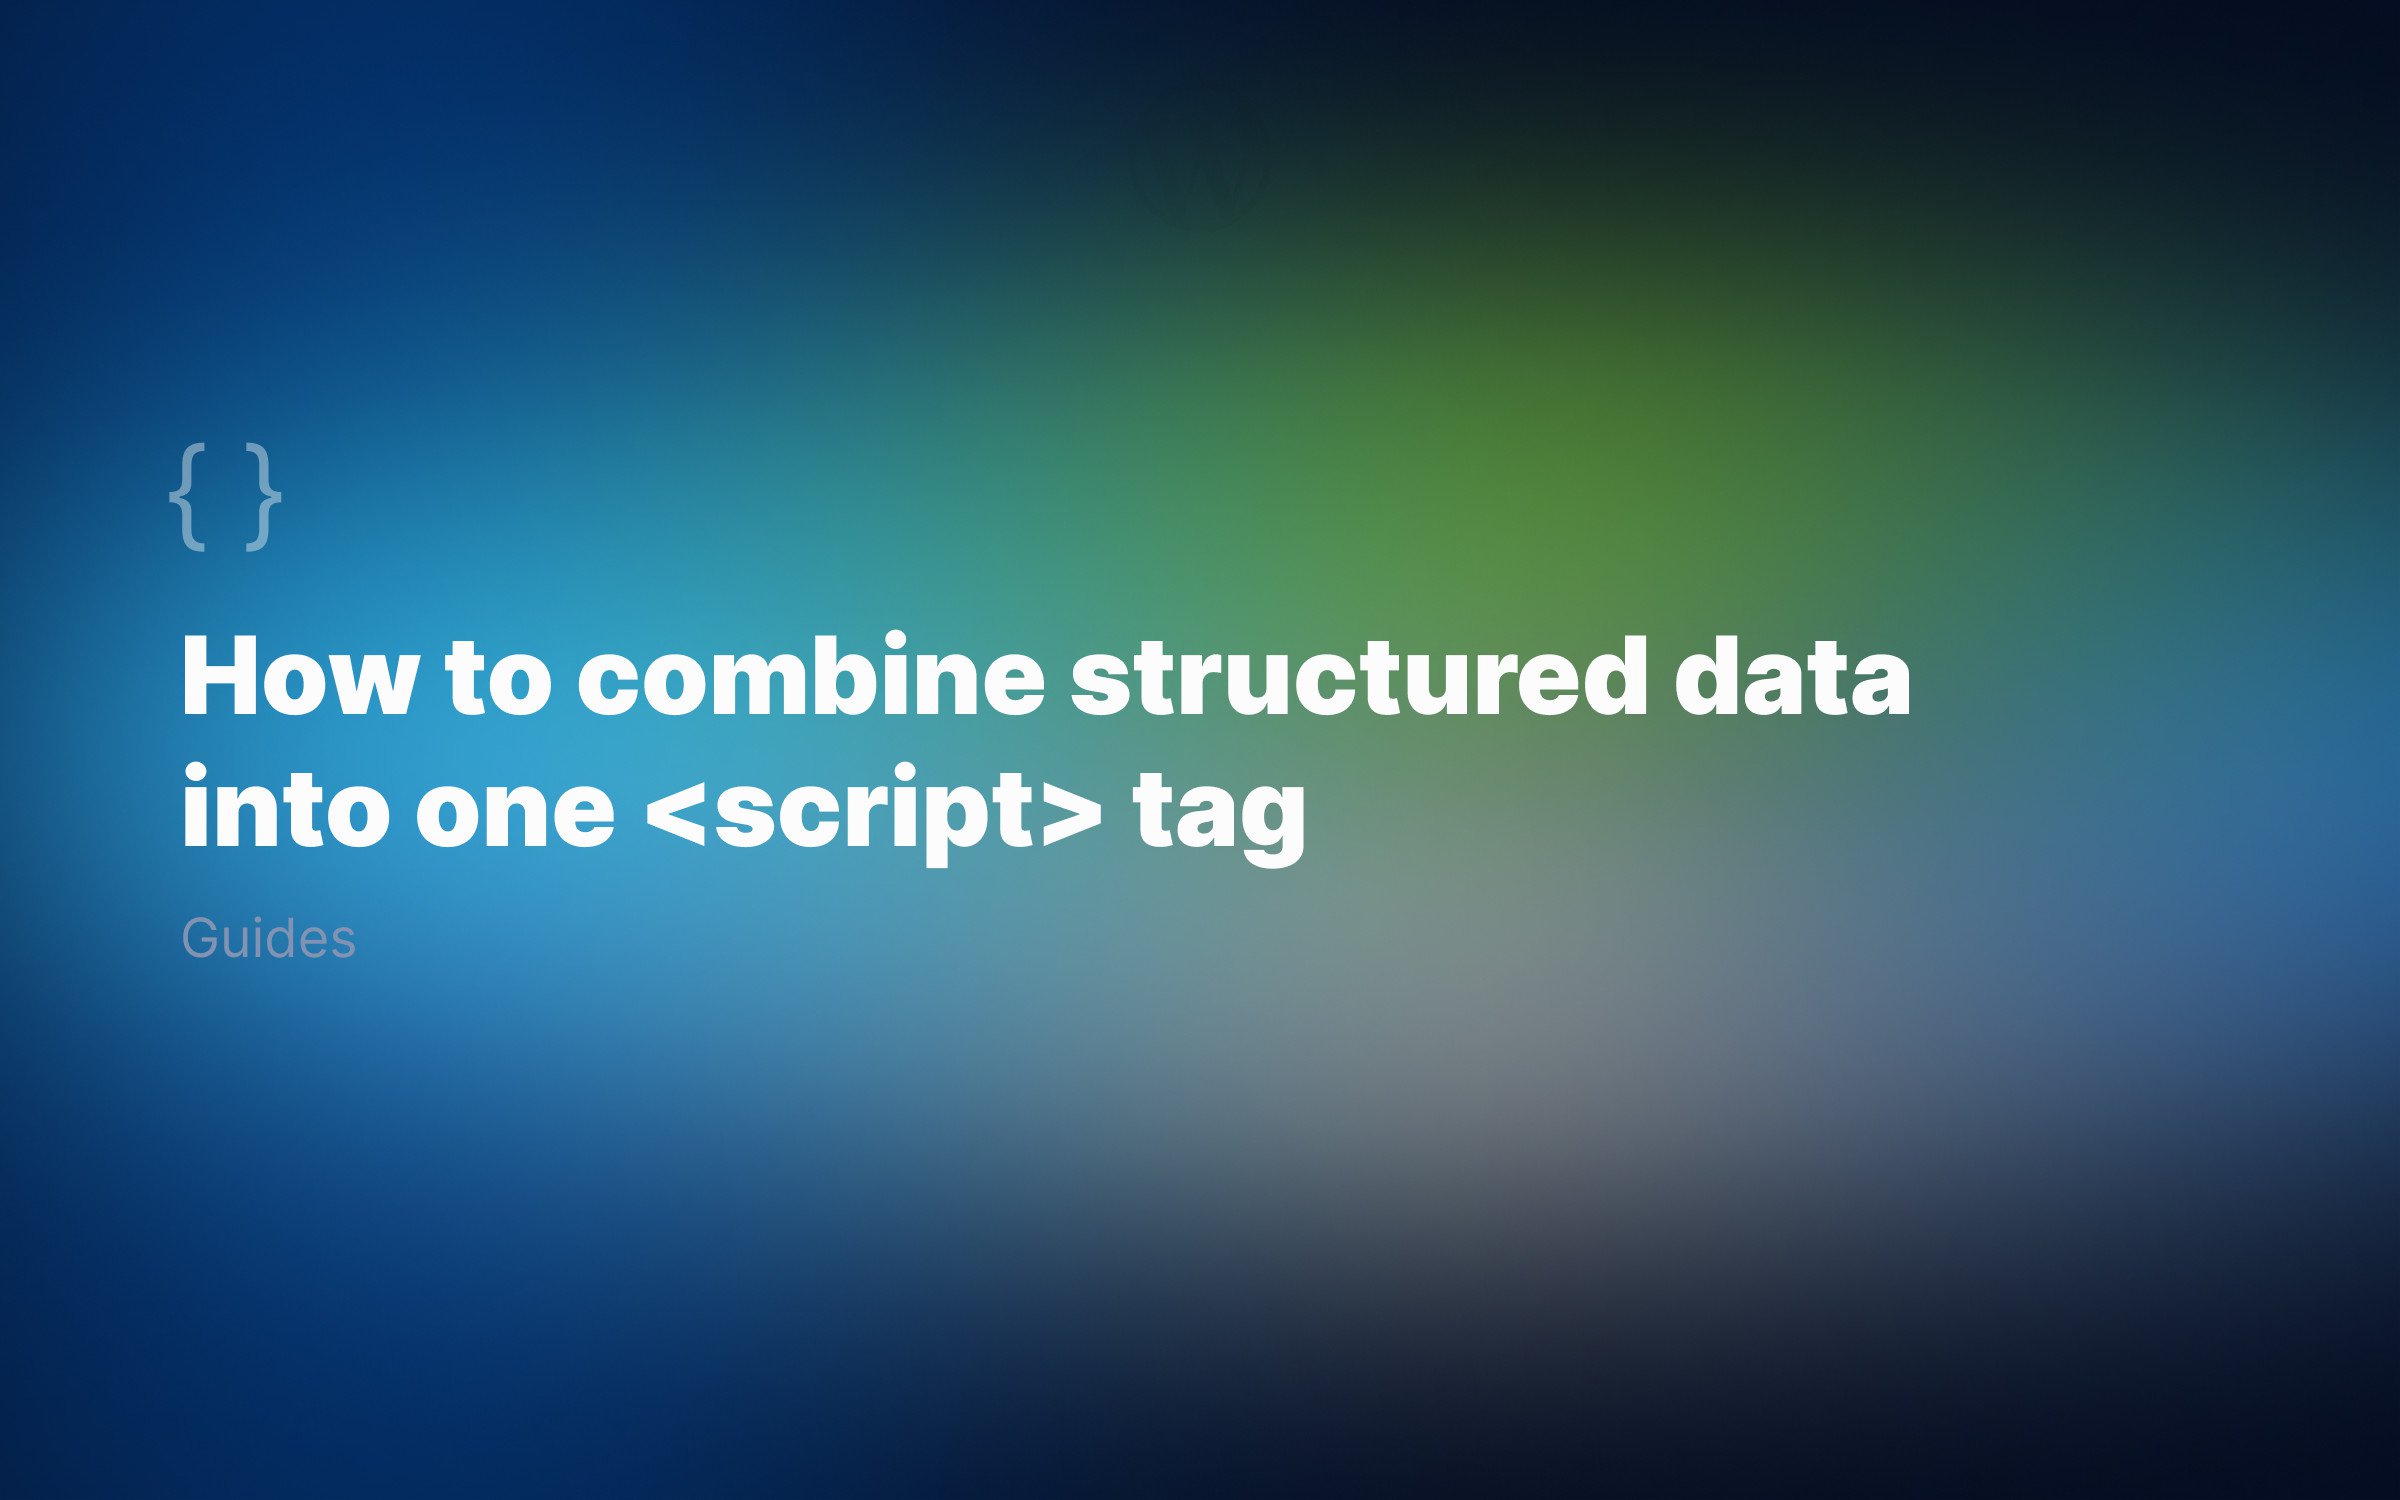 How to combine structured data into one script tag